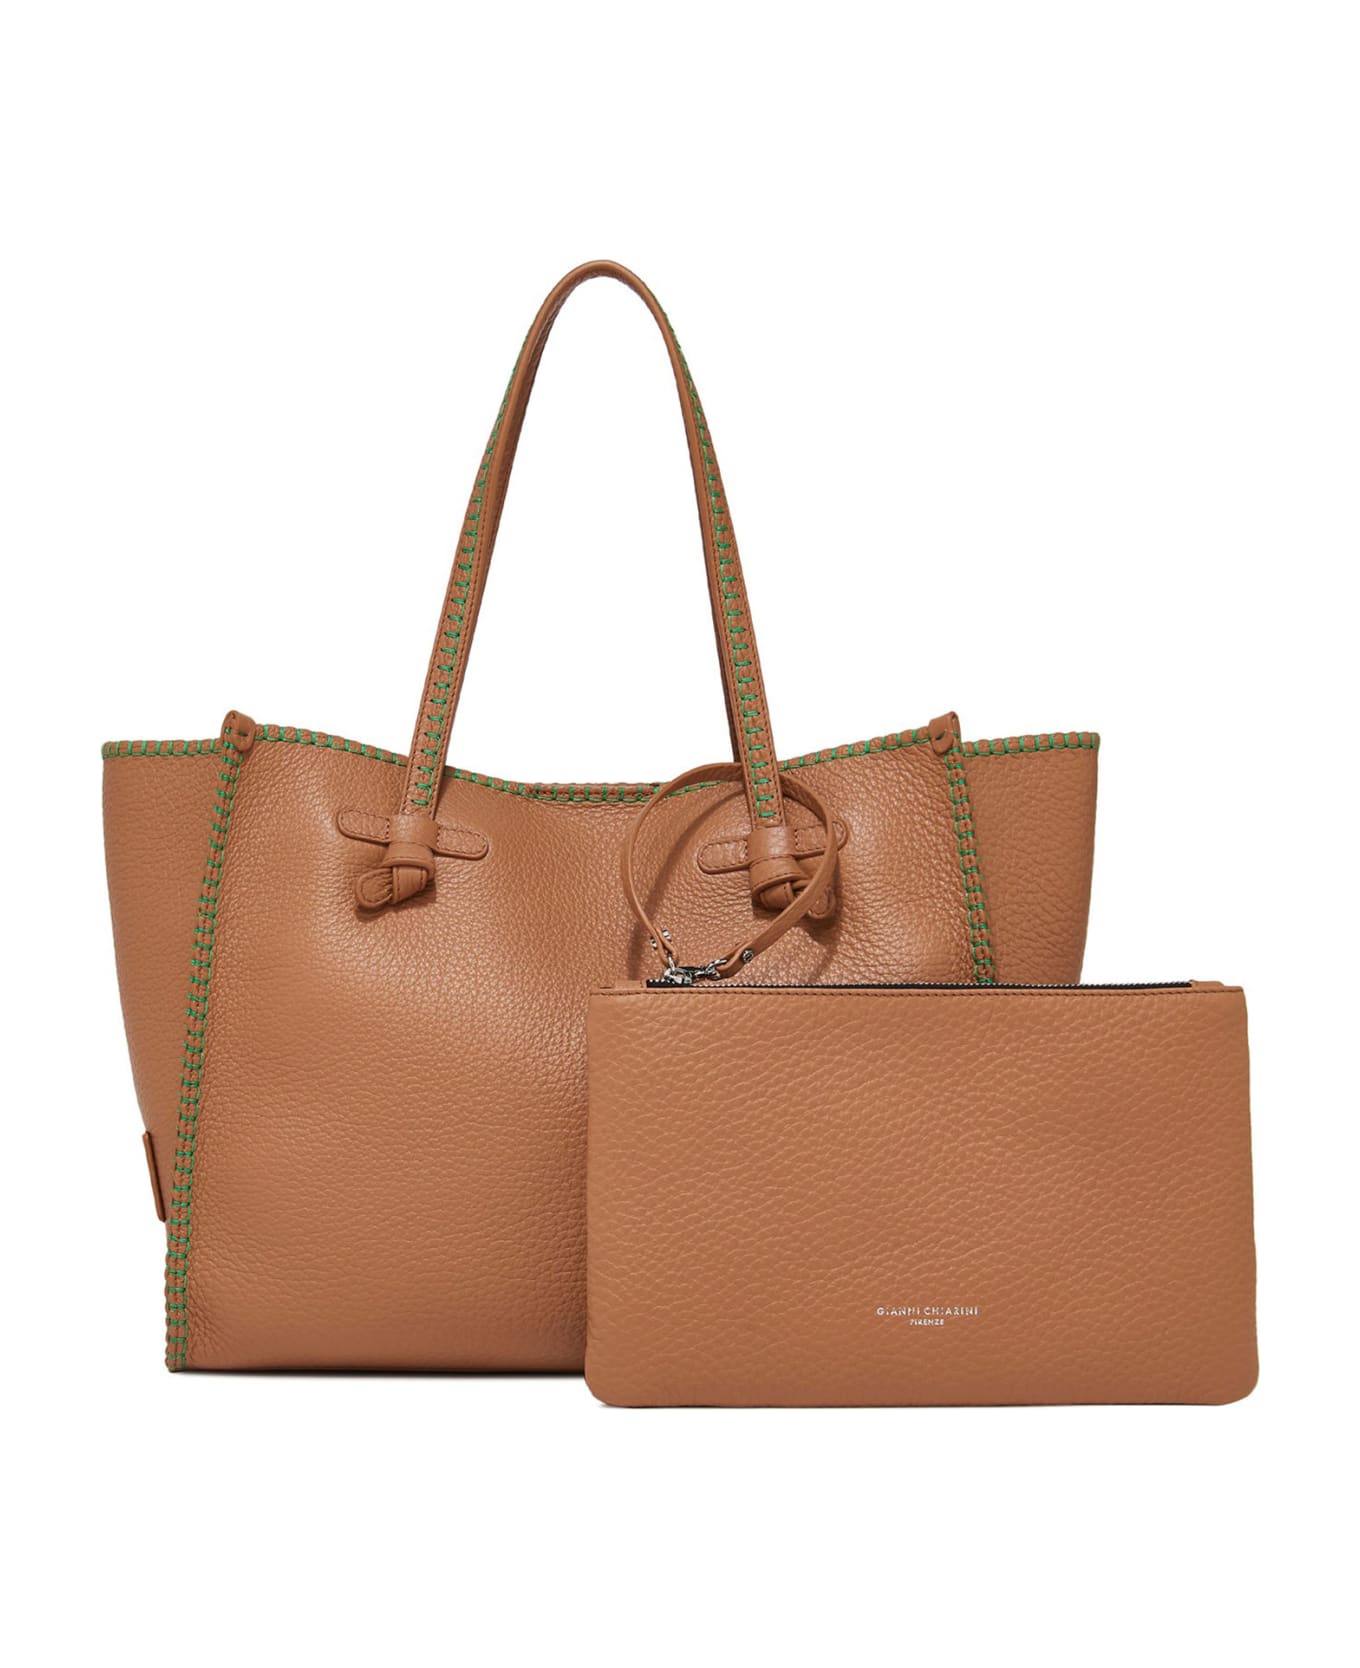 Gianni Chiarini Marcella Shopping Bag In Bubble Leather - TOFFEE トートバッグ